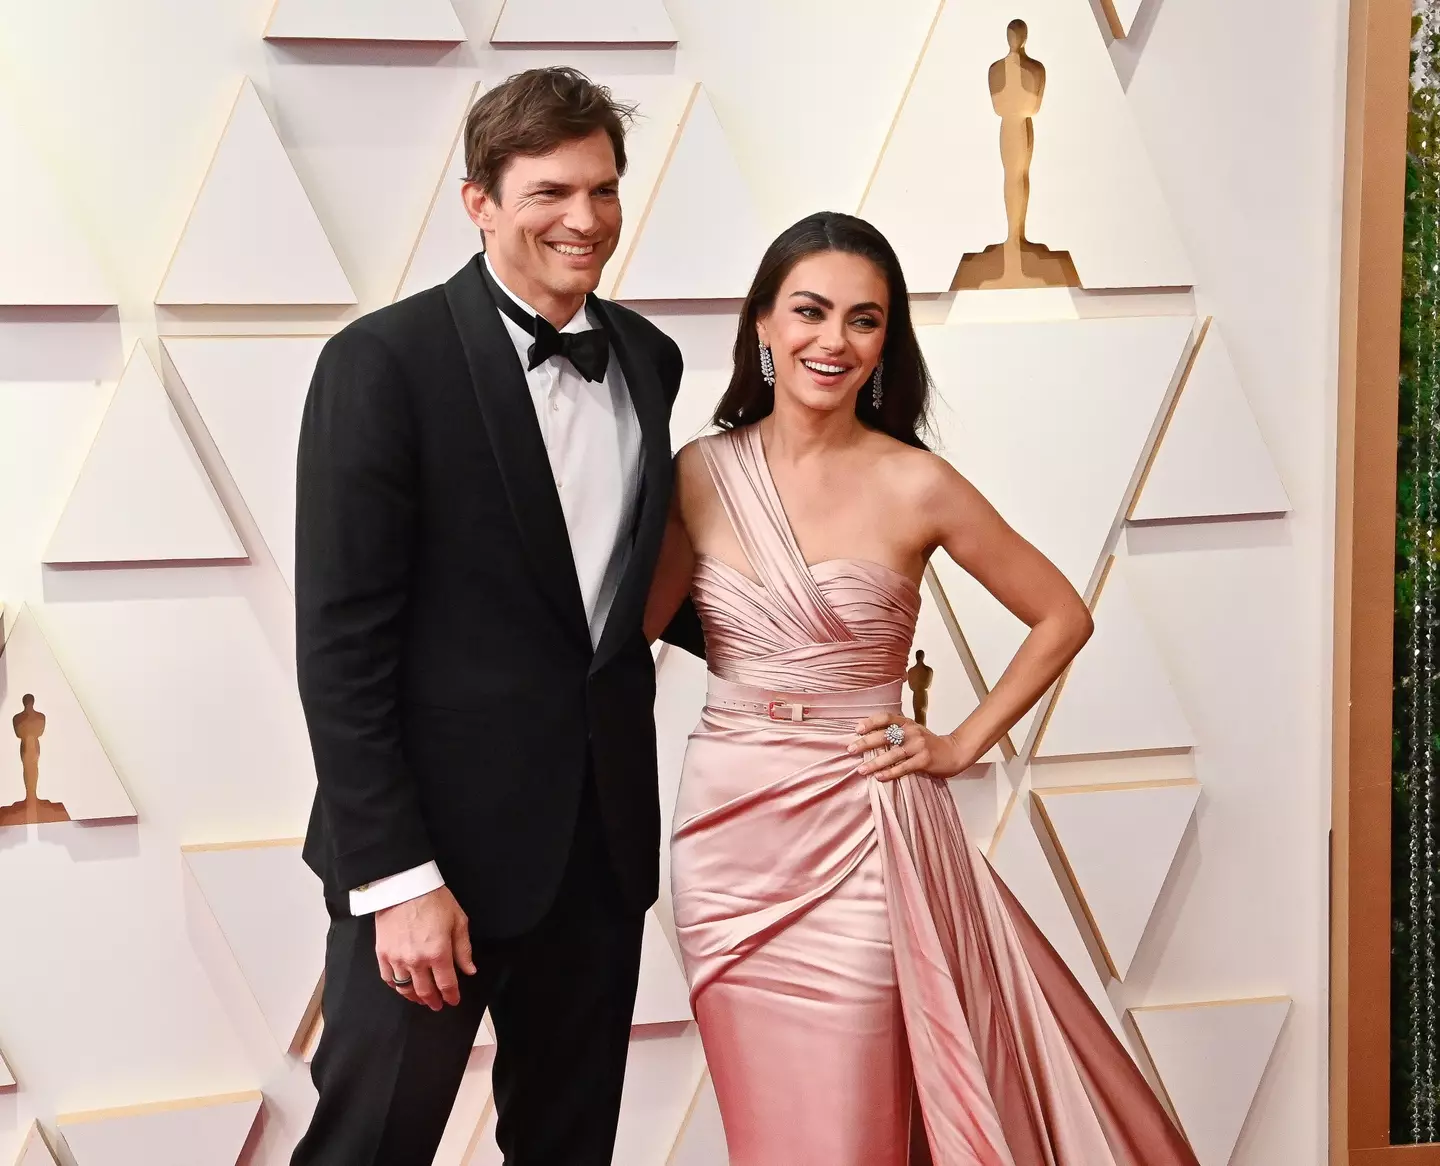 Kunis told Kutcher off for his awkward red carpet pose.